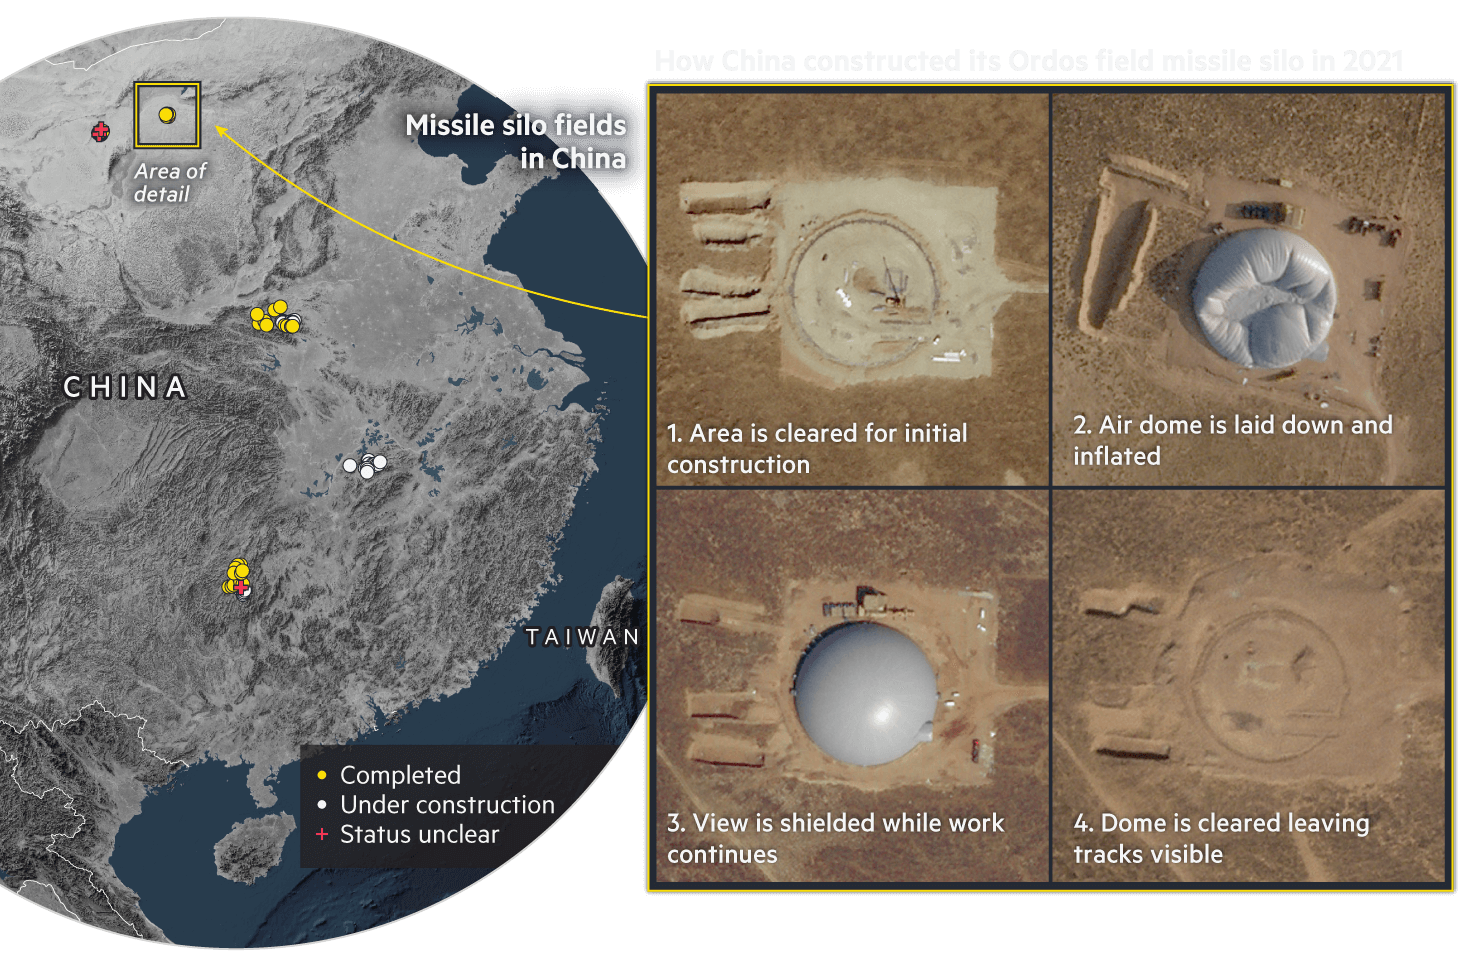 Map showing the location of China's missile silos and satellite images showing how they are built below balloons to shield their construction